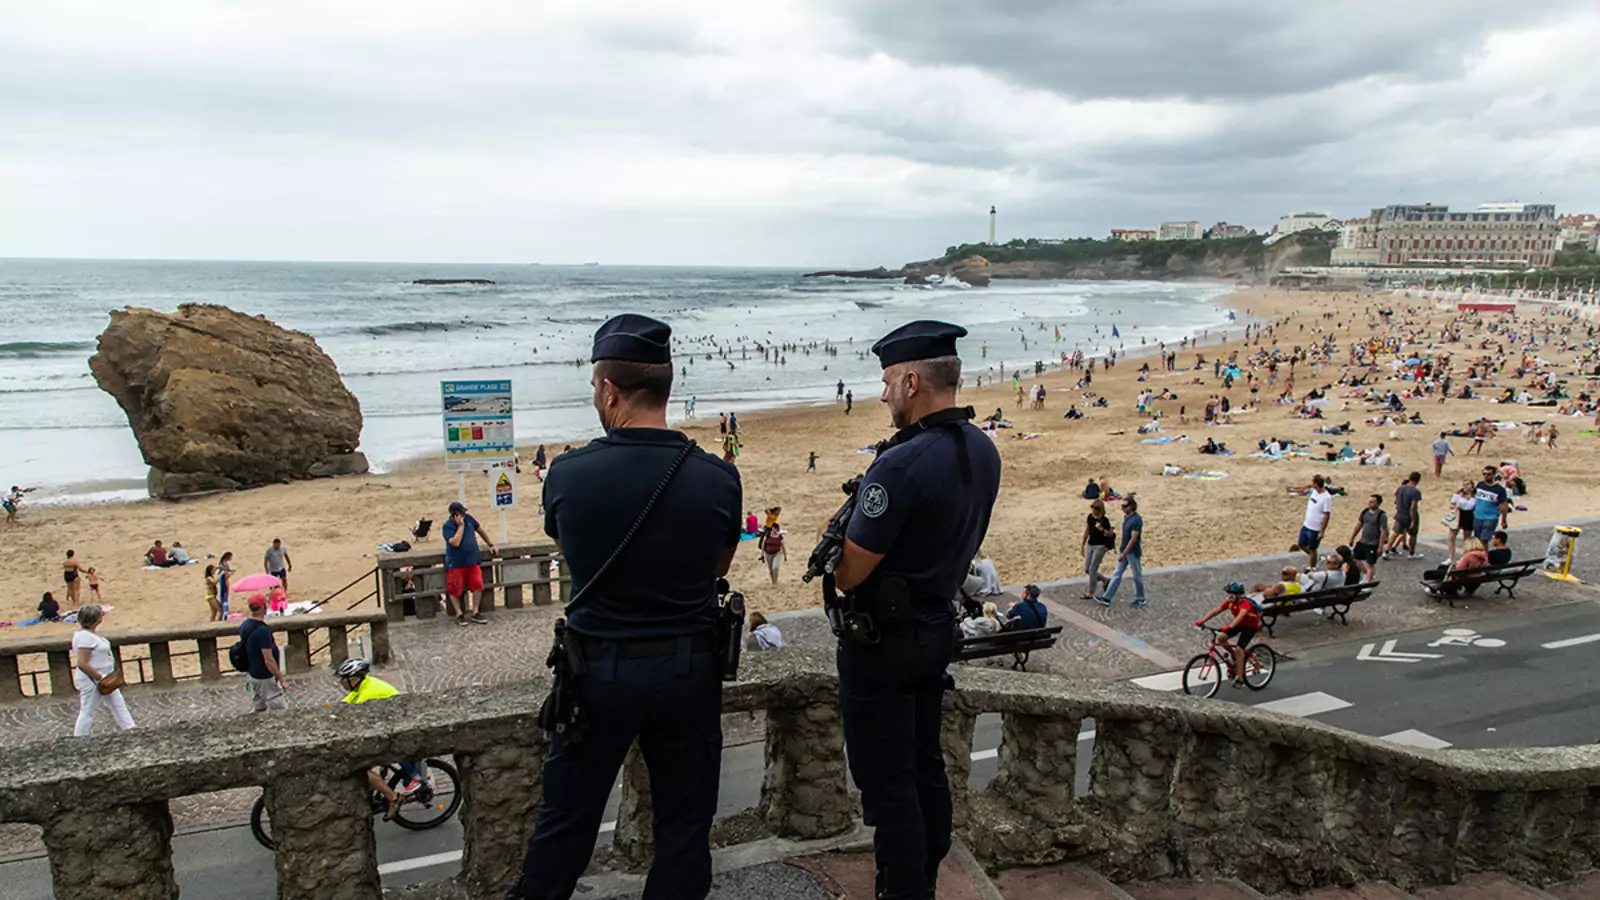 Police officers patrol the beach in Biarritz, France, ahead of the G7 summit.